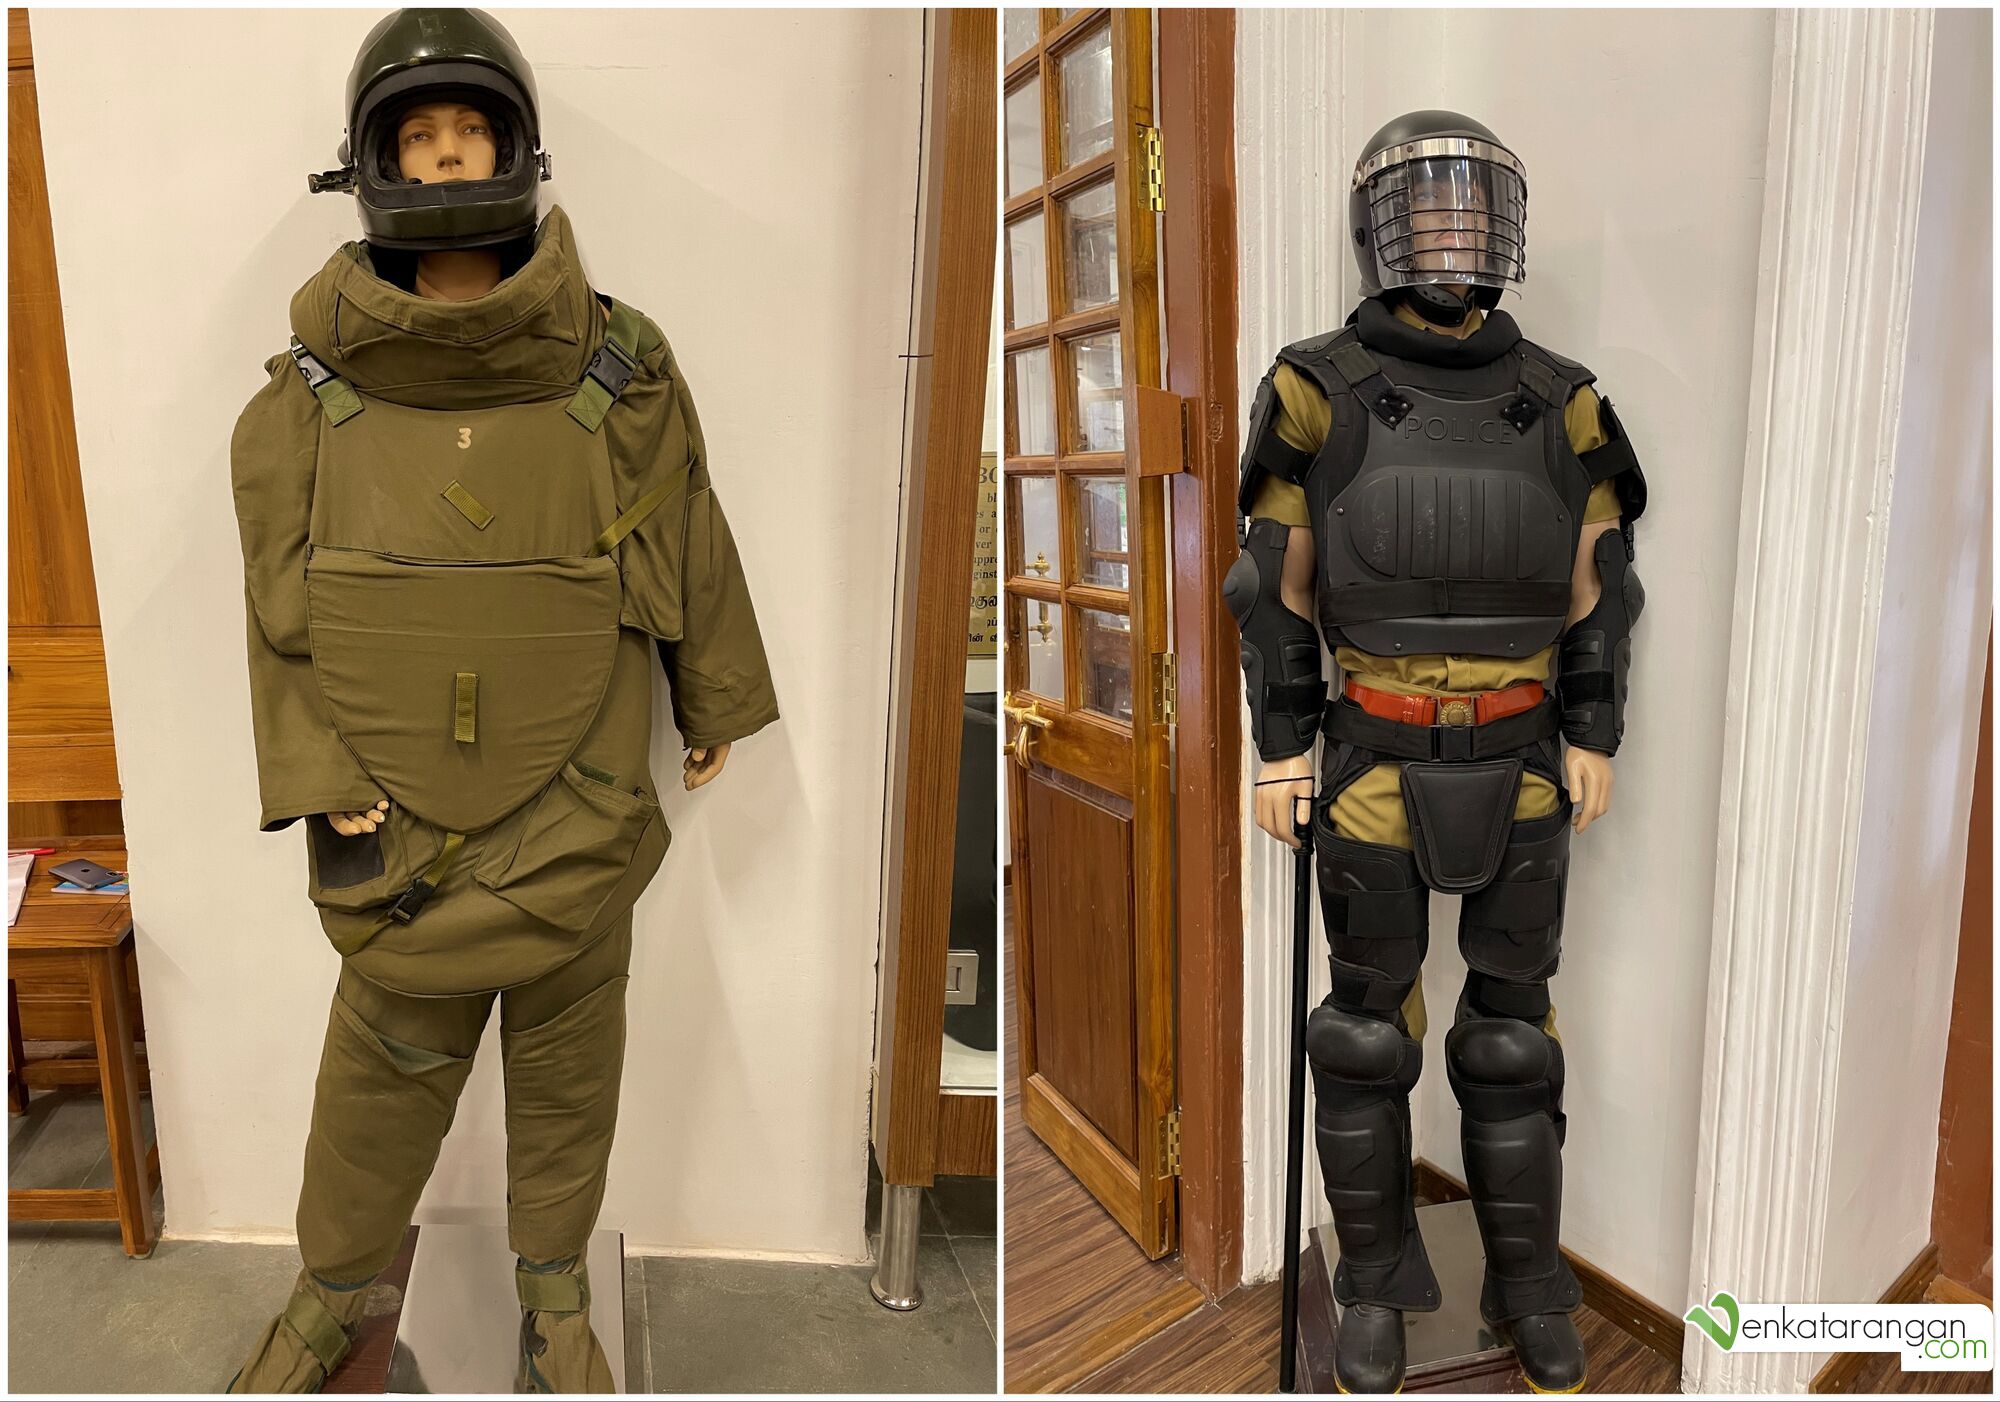 Body Armour, Bomb shield used by the men and women in the force